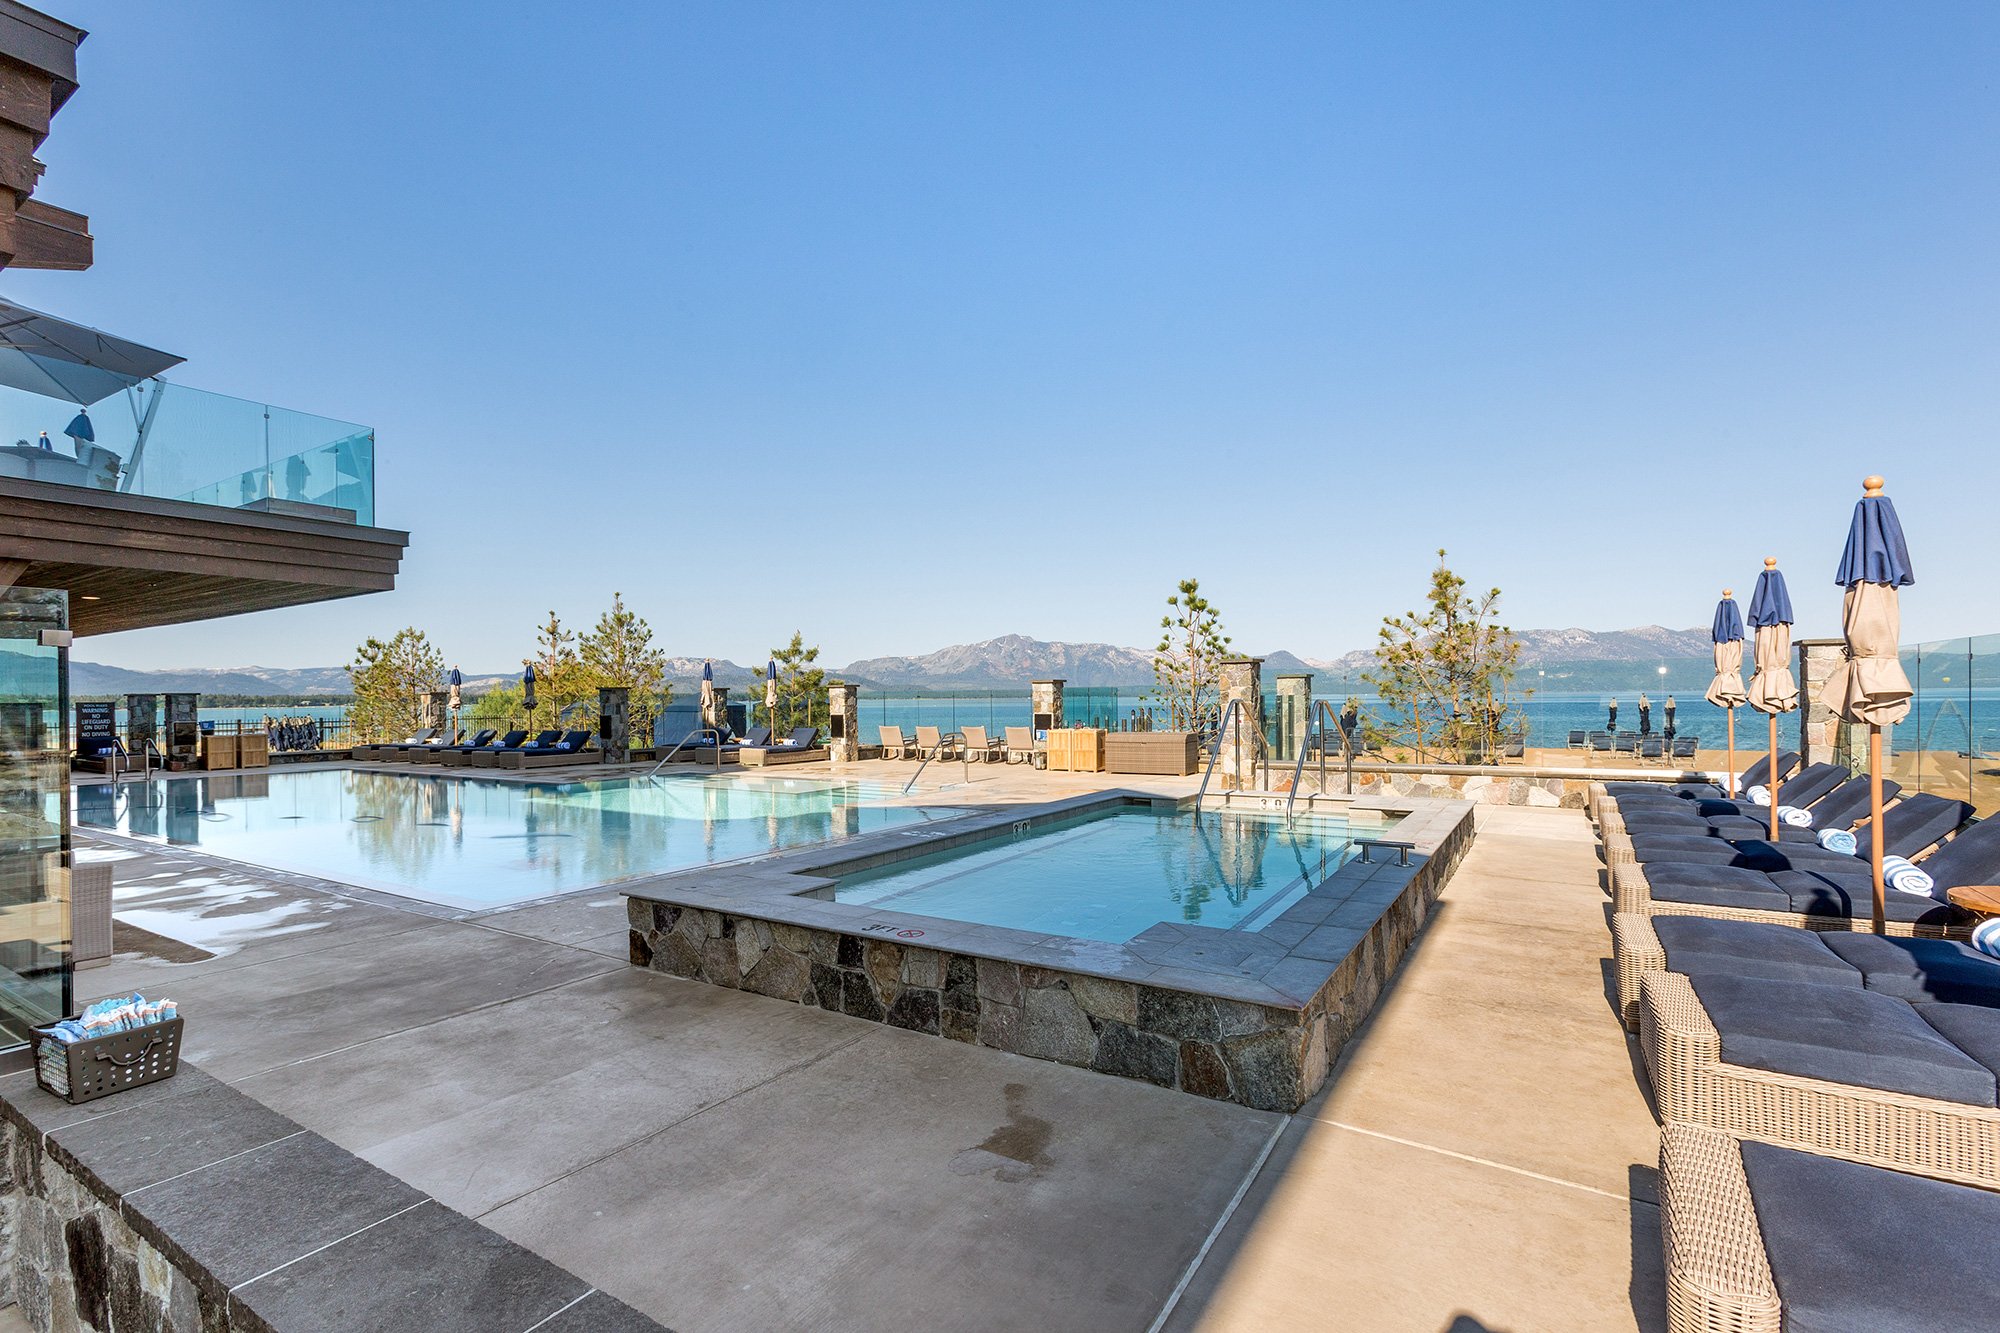 Relaxing pool area at the lakefront resort, showcasing a stunning view of serene Lake Tahoe and the surrounding Sierras. (Copy) (Copy) (Copy)